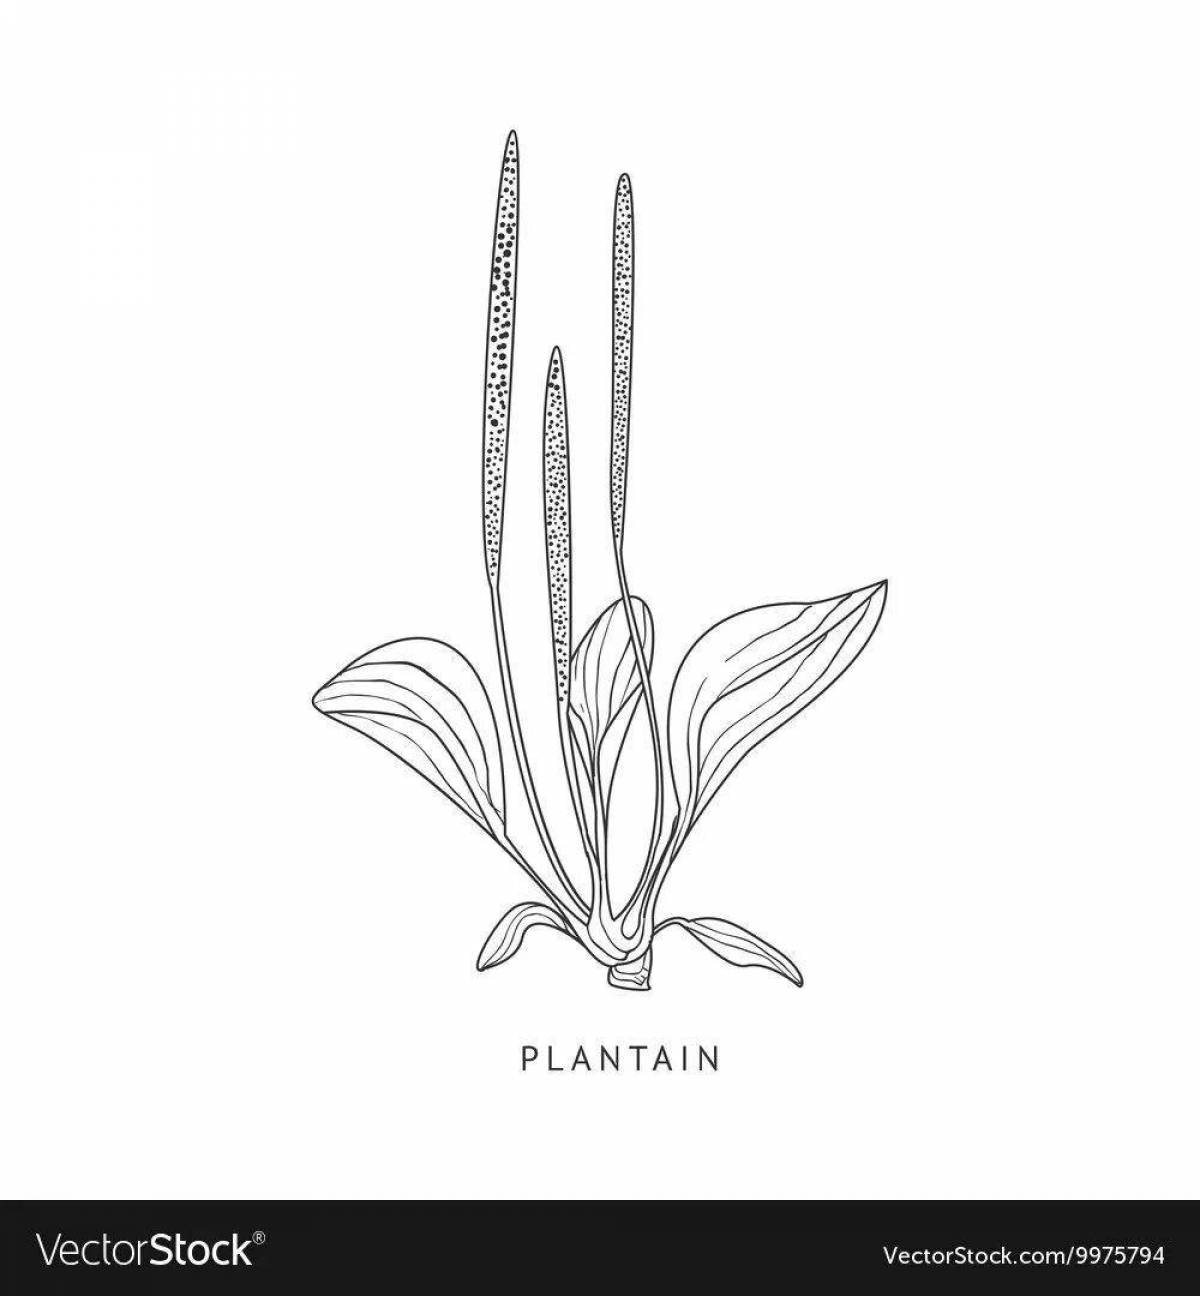 Coloring page dazzling plantain